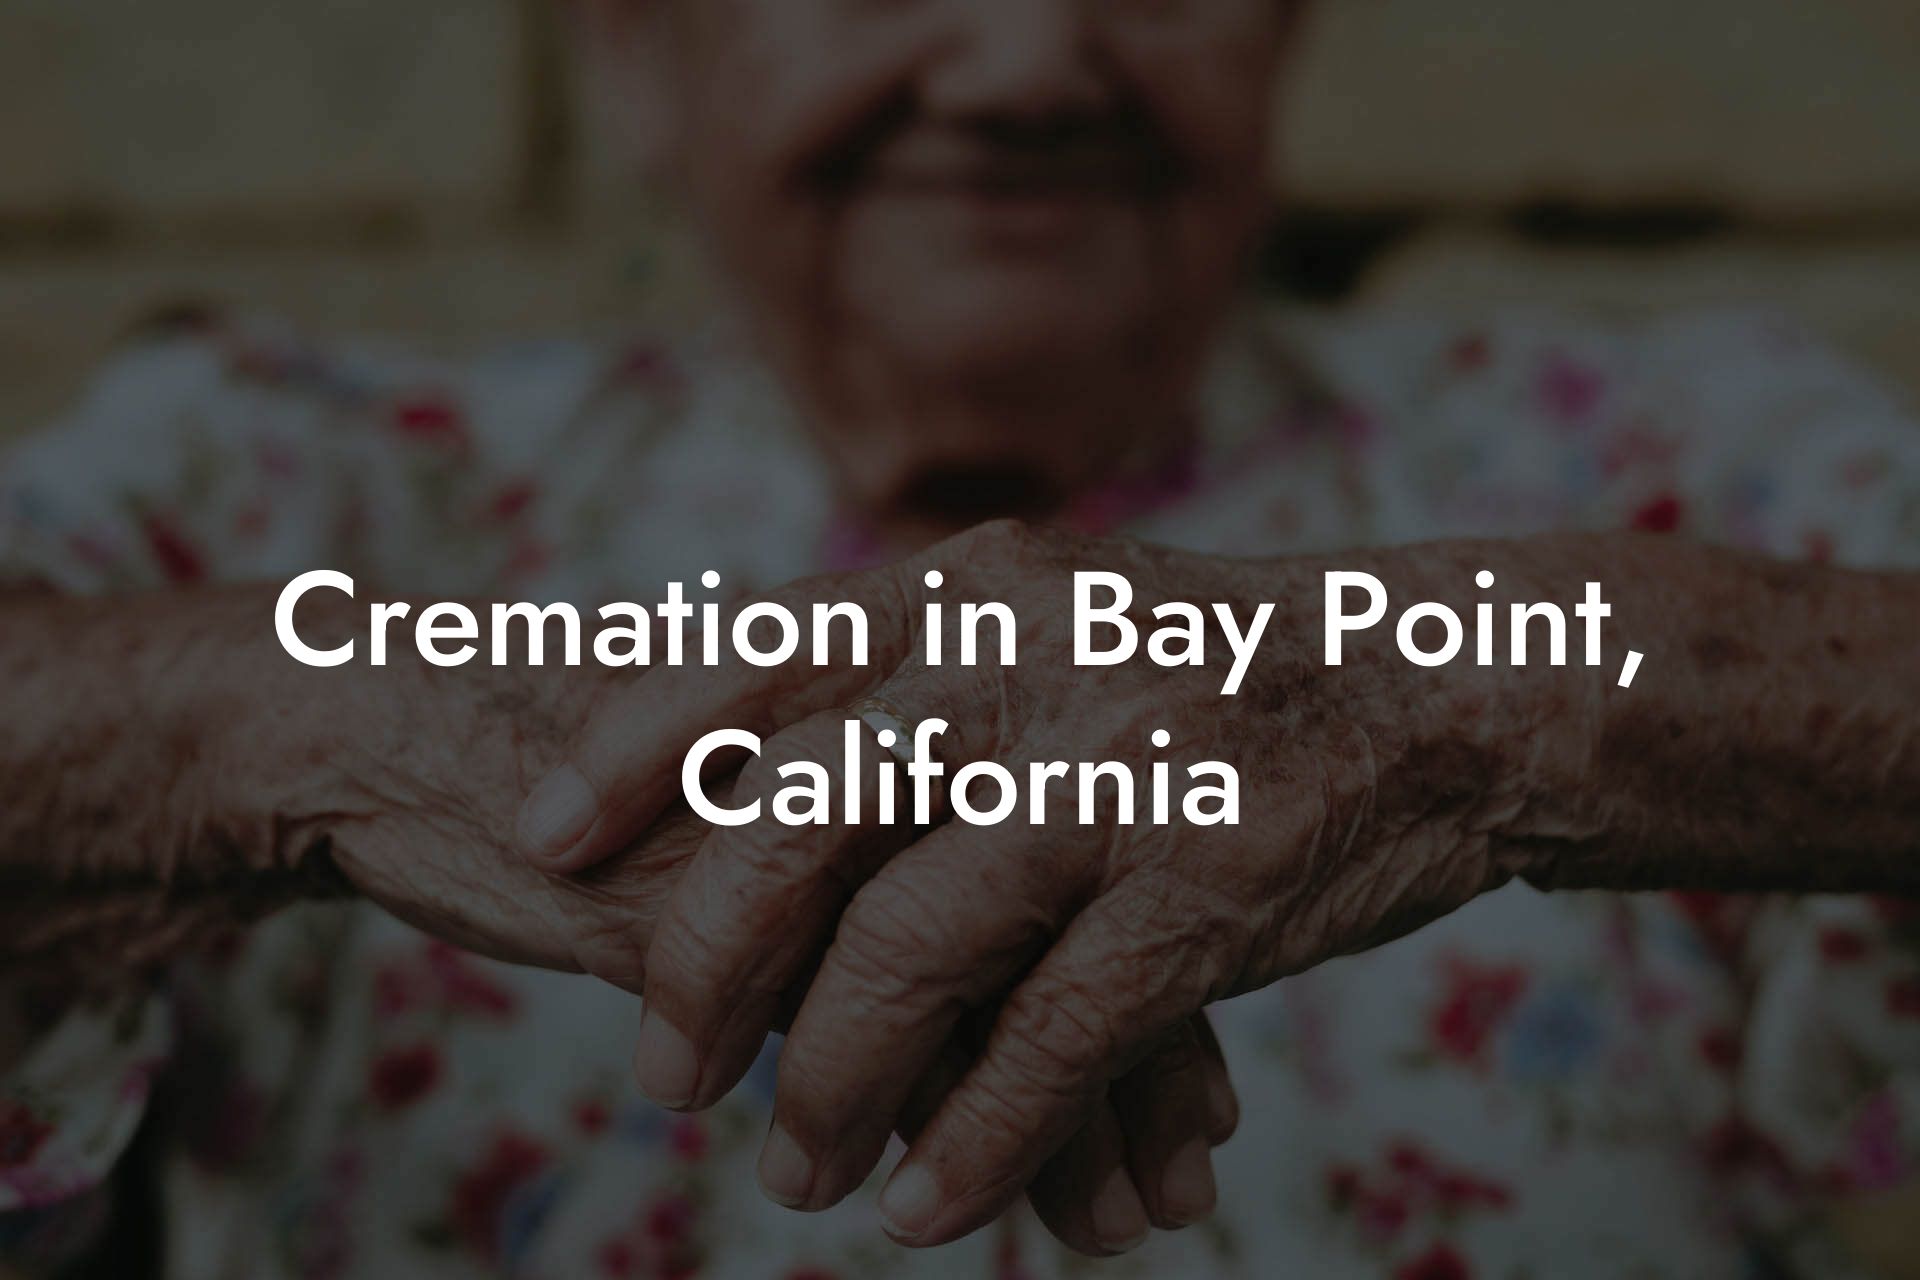 Cremation in Bay Point, California